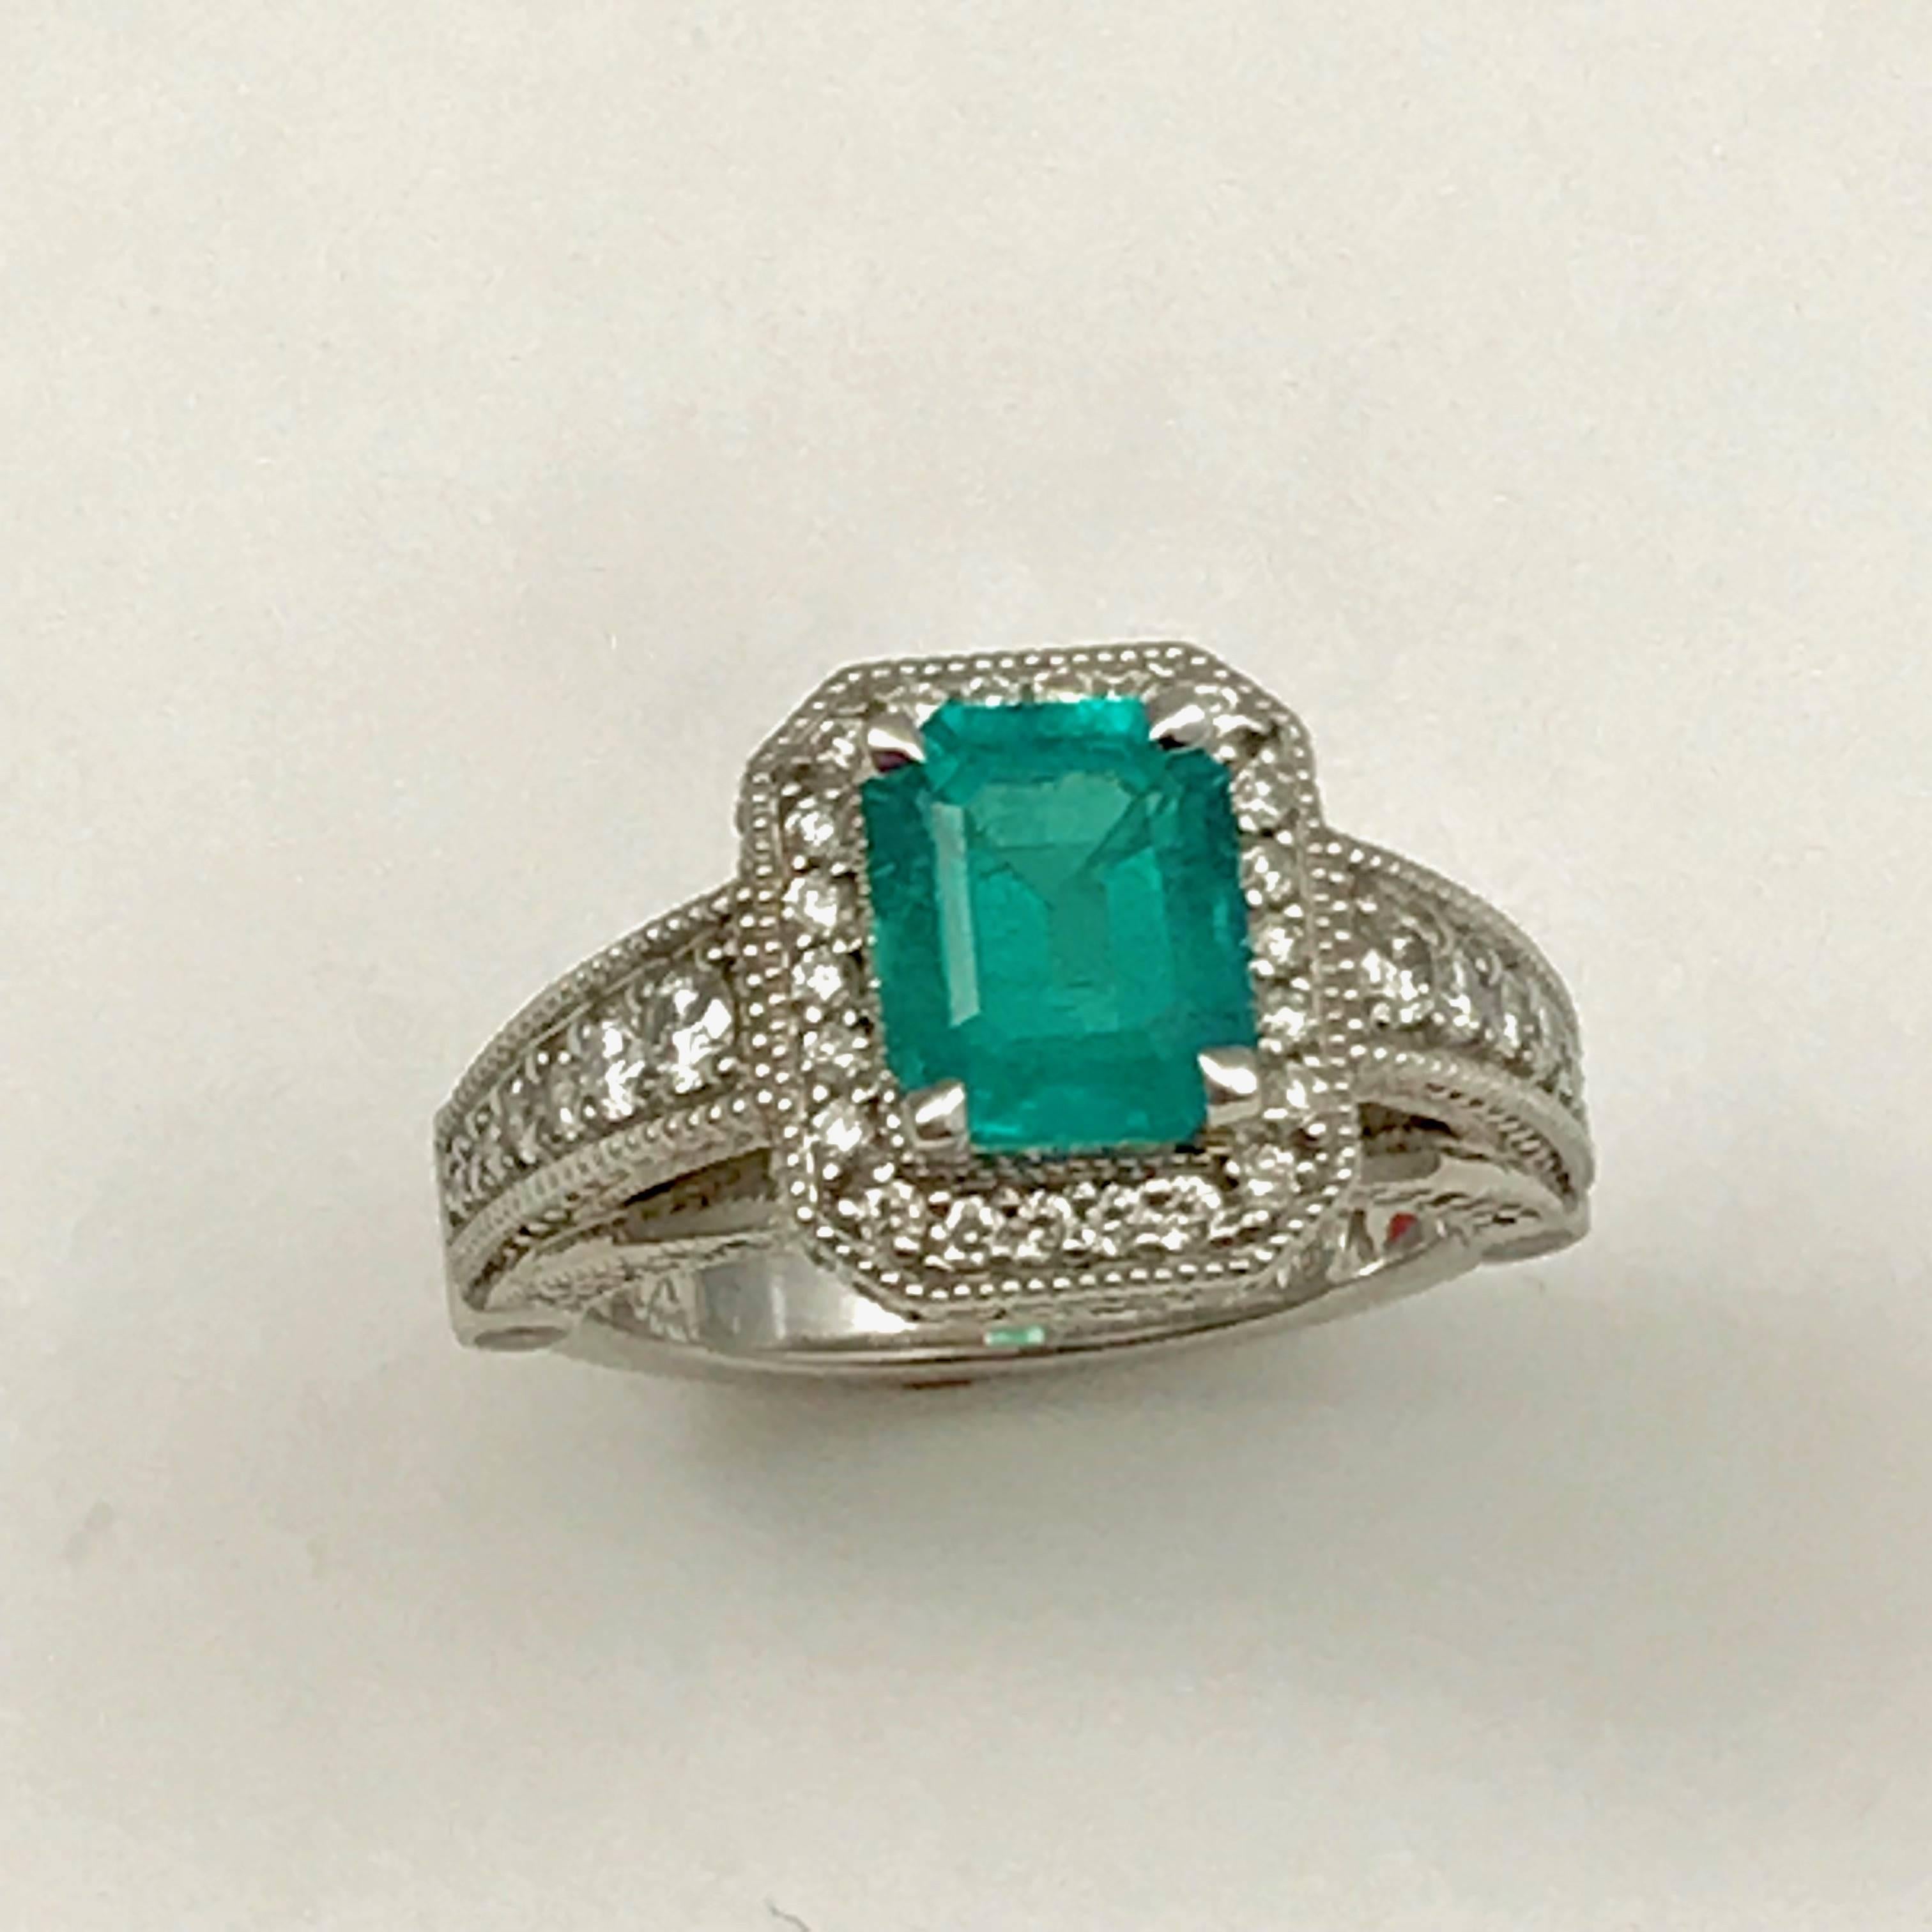 1.56 Carat Colombian Emerald Cocktail Ring Set in 14K White Gold.
This 1.56 Carat Colombian Emerald set in 14k white gold with 1.02 cts. of diamonds.

Ring will be sized free of charge, please state size when ordering.
Comes in a cherrywood box